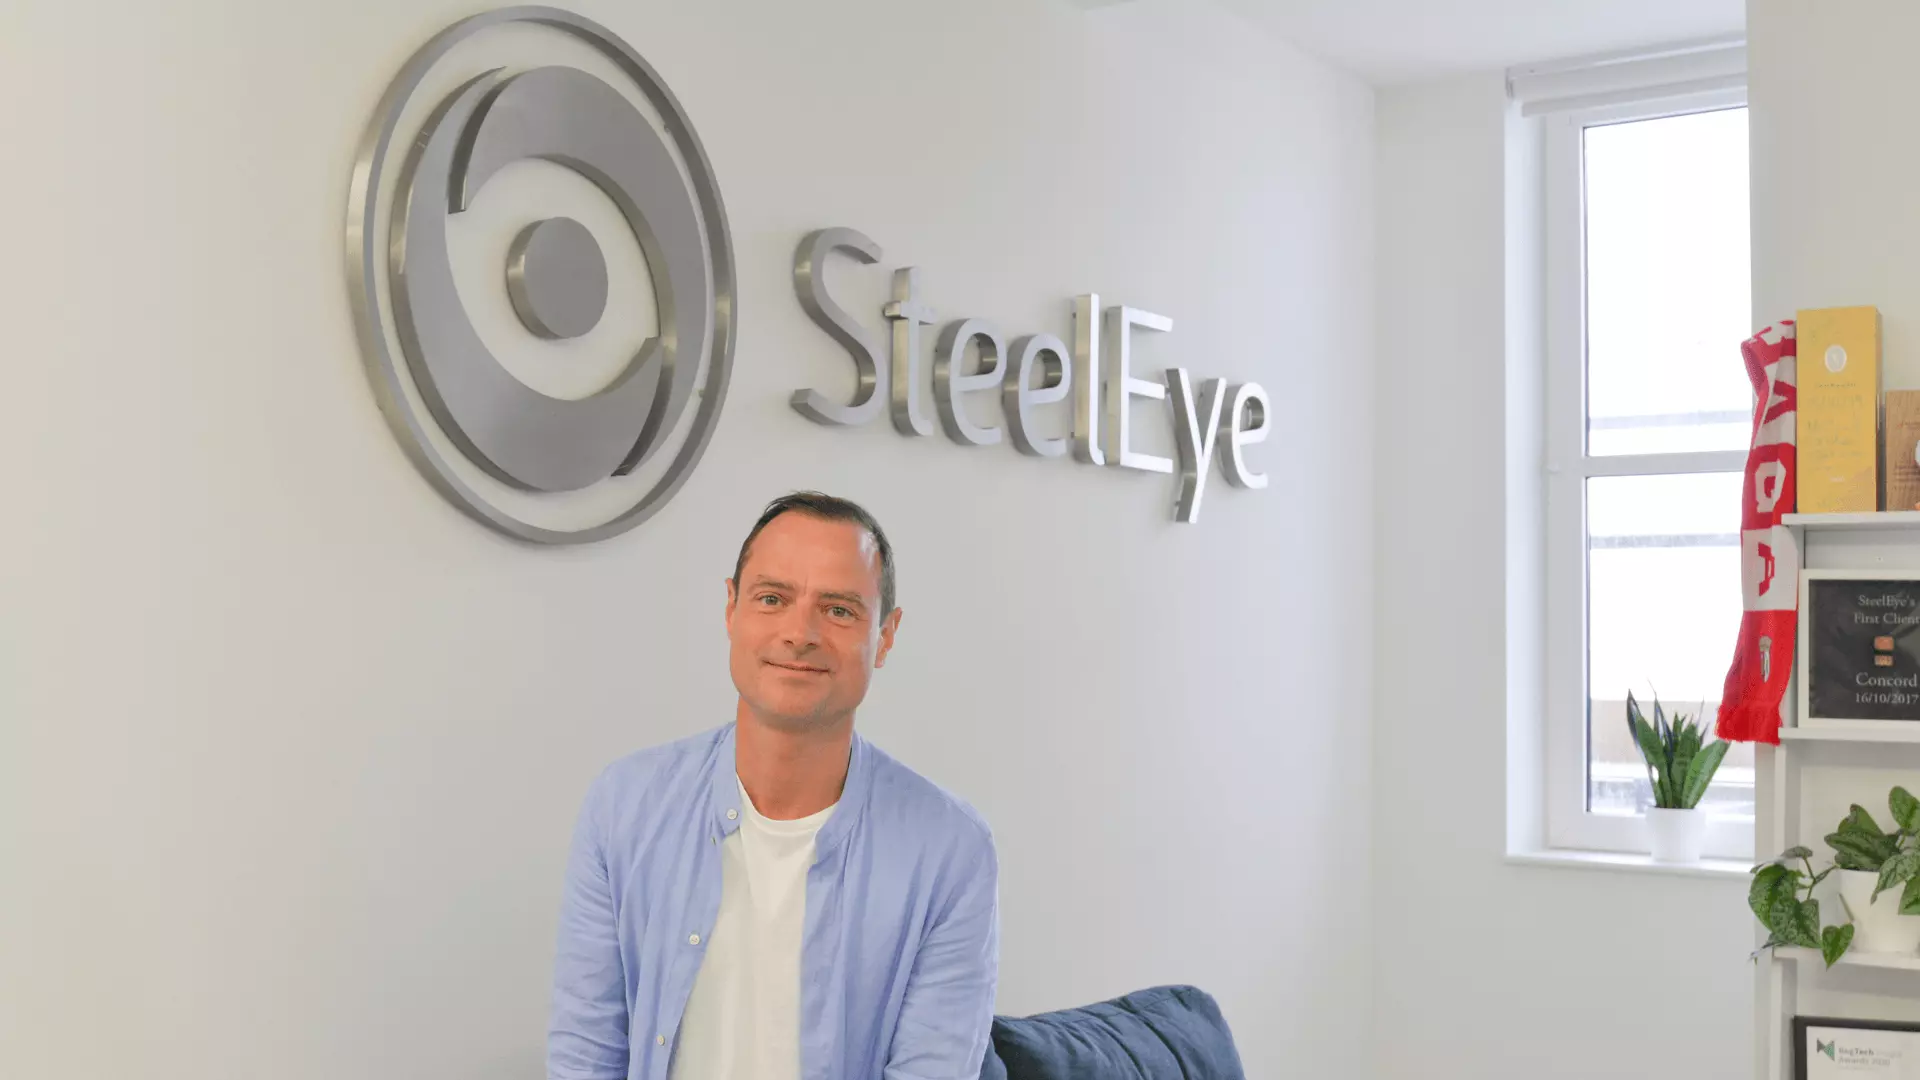 SteelEye Five Lessons in Five Years of Fintech with Matt-Smith